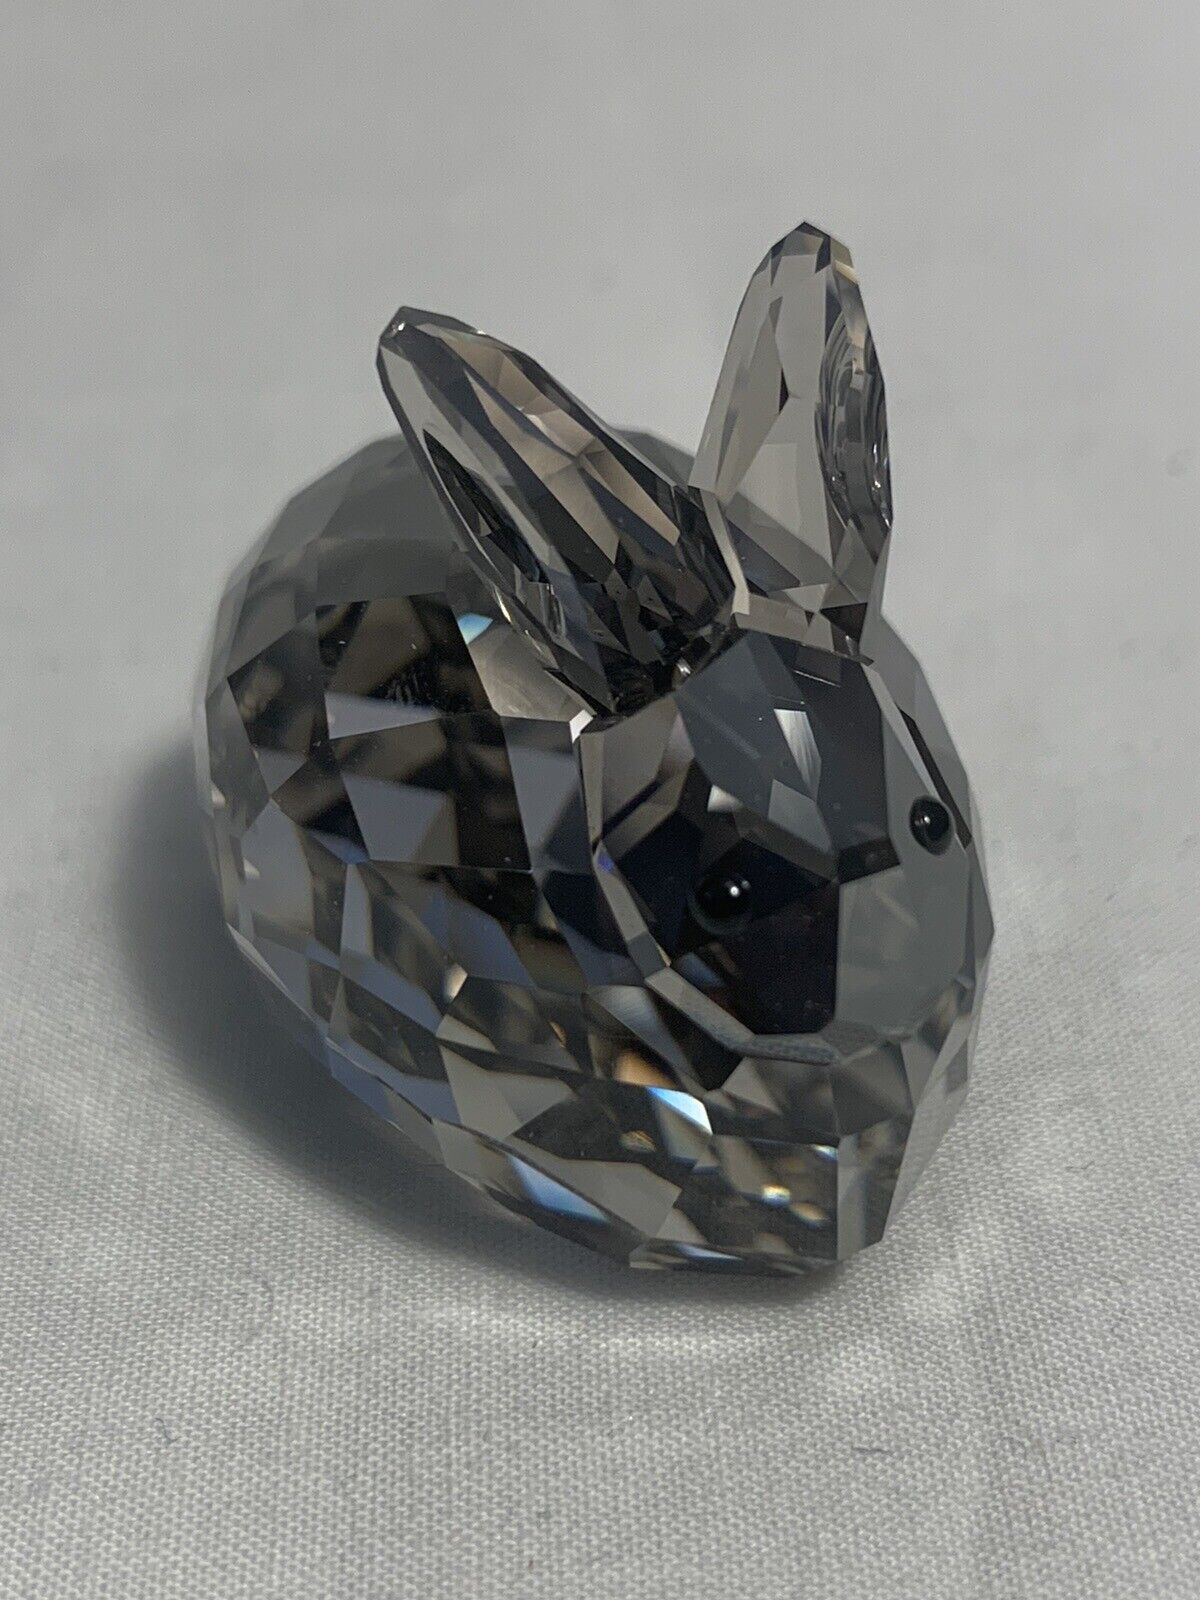 SWAROVSKI LIMITED ONLINE EDITION 2011 HARE 1089977, BEST OFFERS CONSIDERED